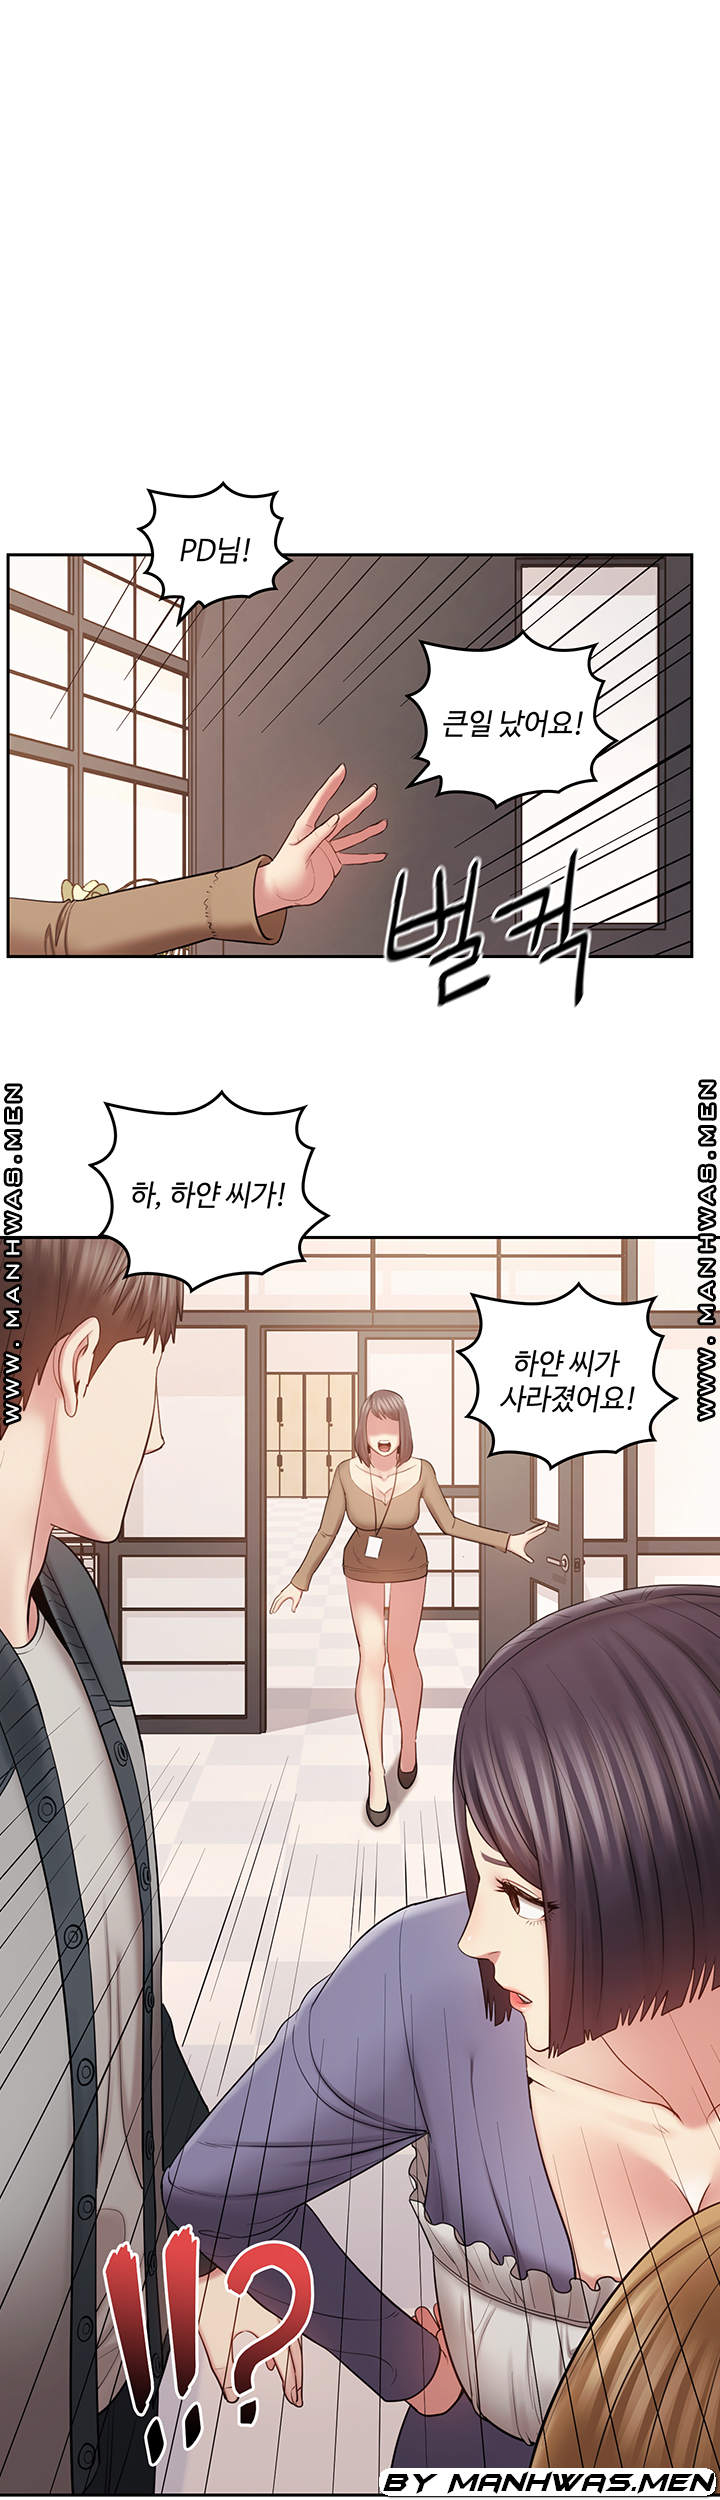 Sok Gung Hap Consulting Raw - Chapter 16 Page 1